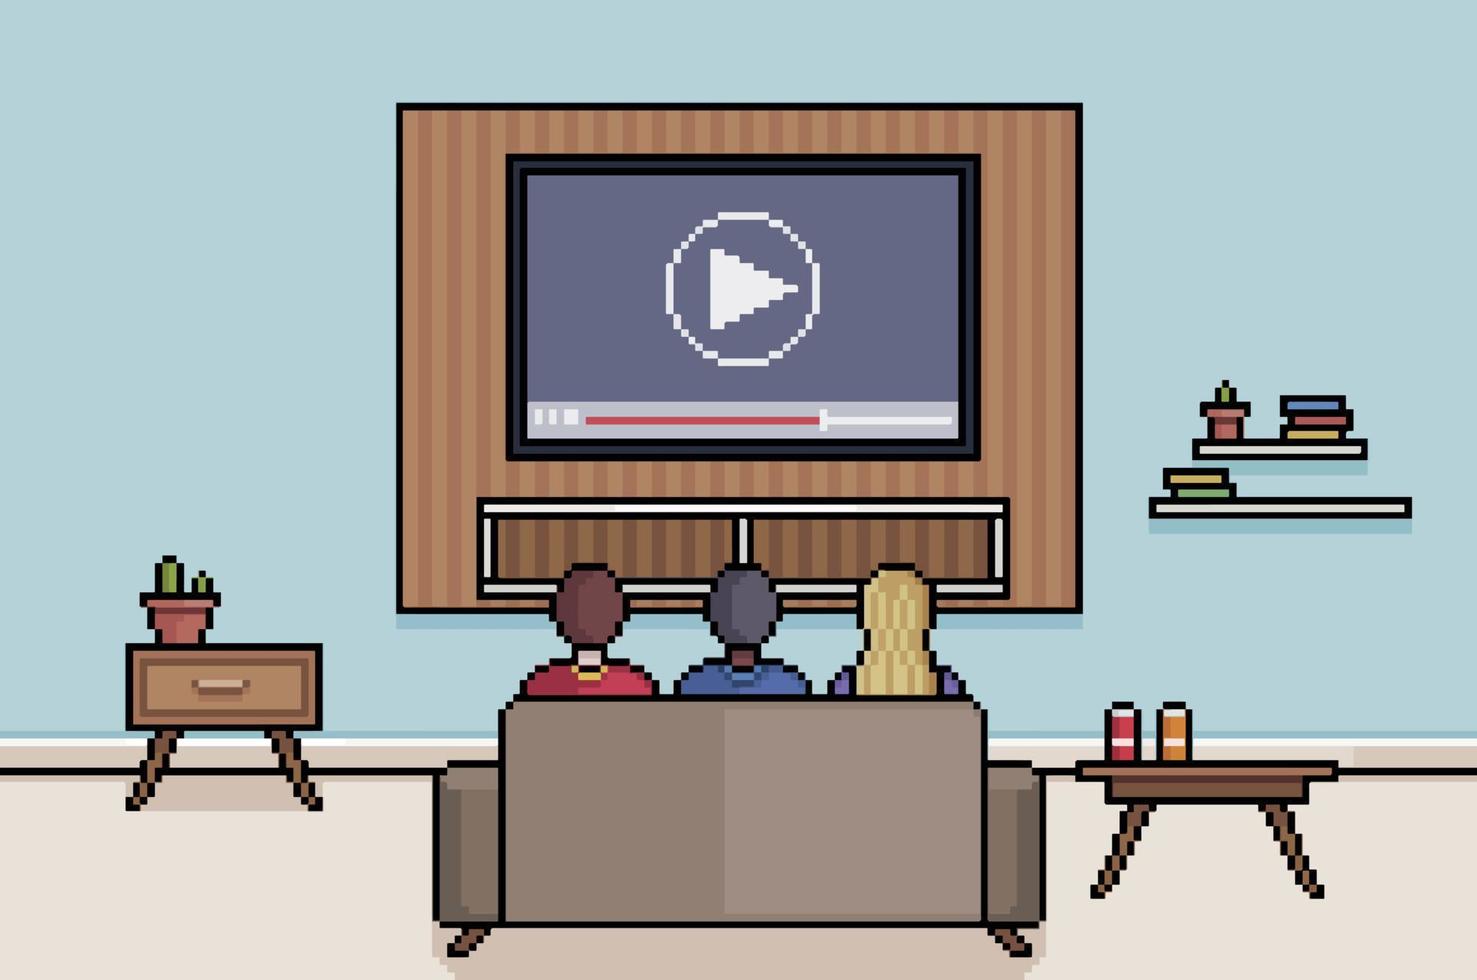 Pixel art living room with people watching TV, movie, series and streaming app 8bit game background vector